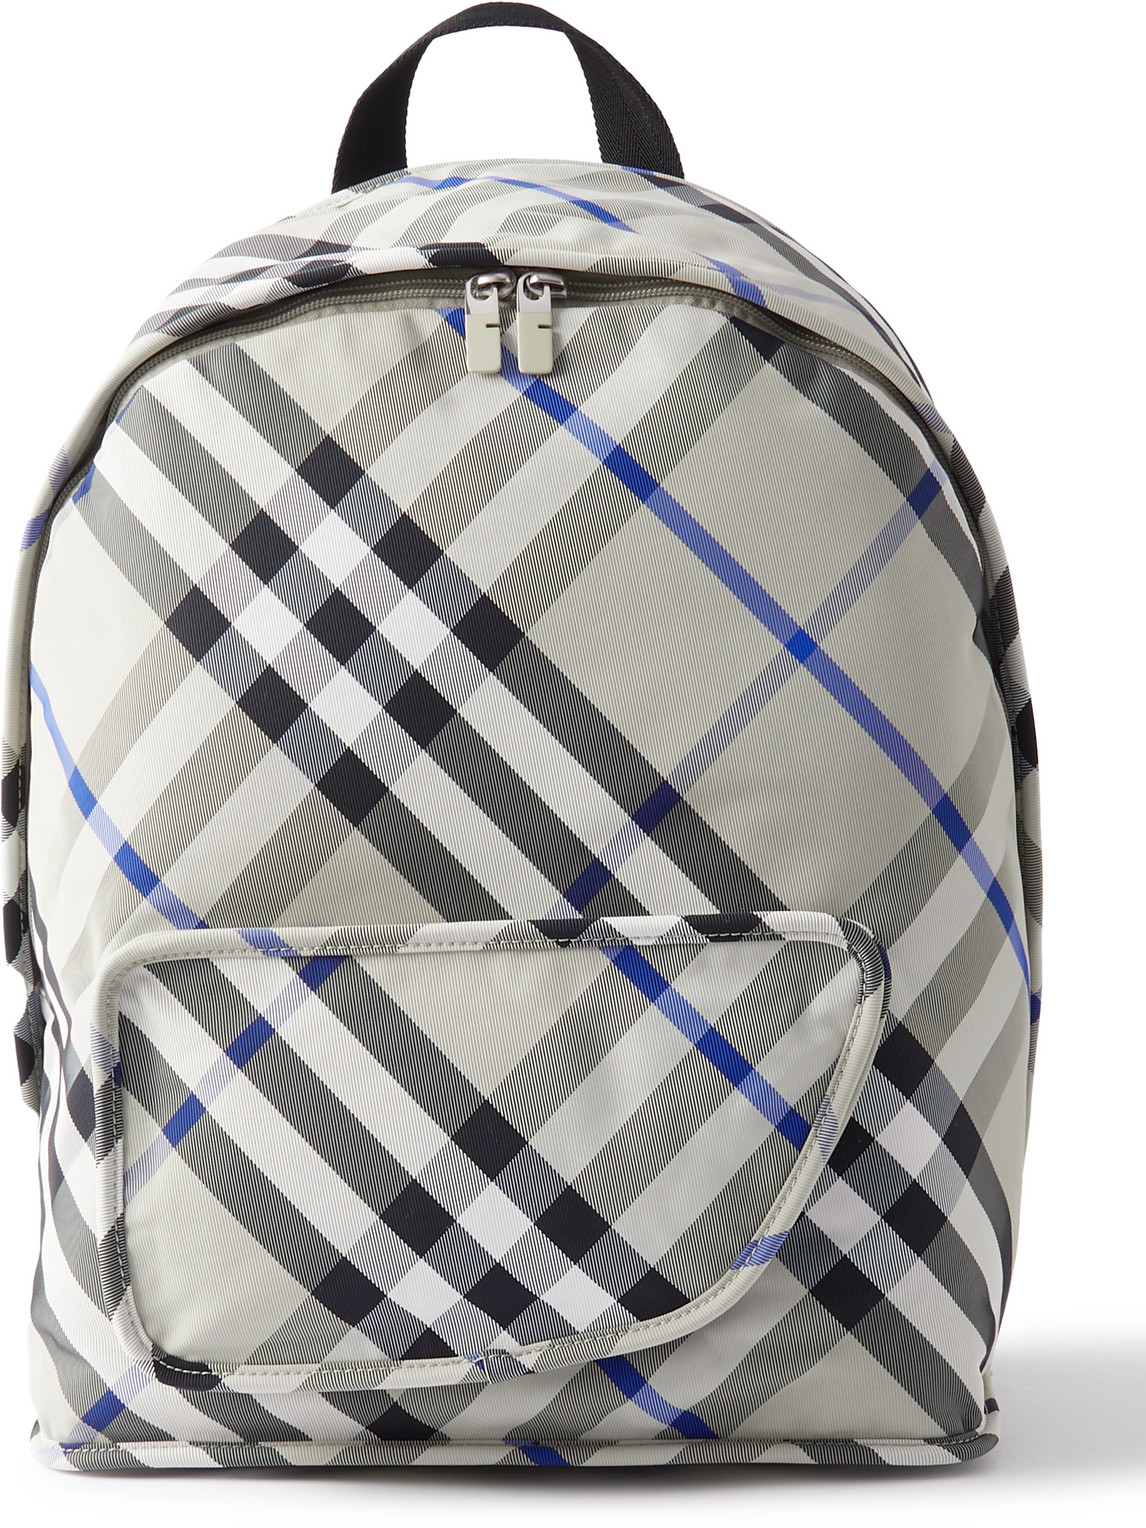 Checked Nylon-Twill Backpack